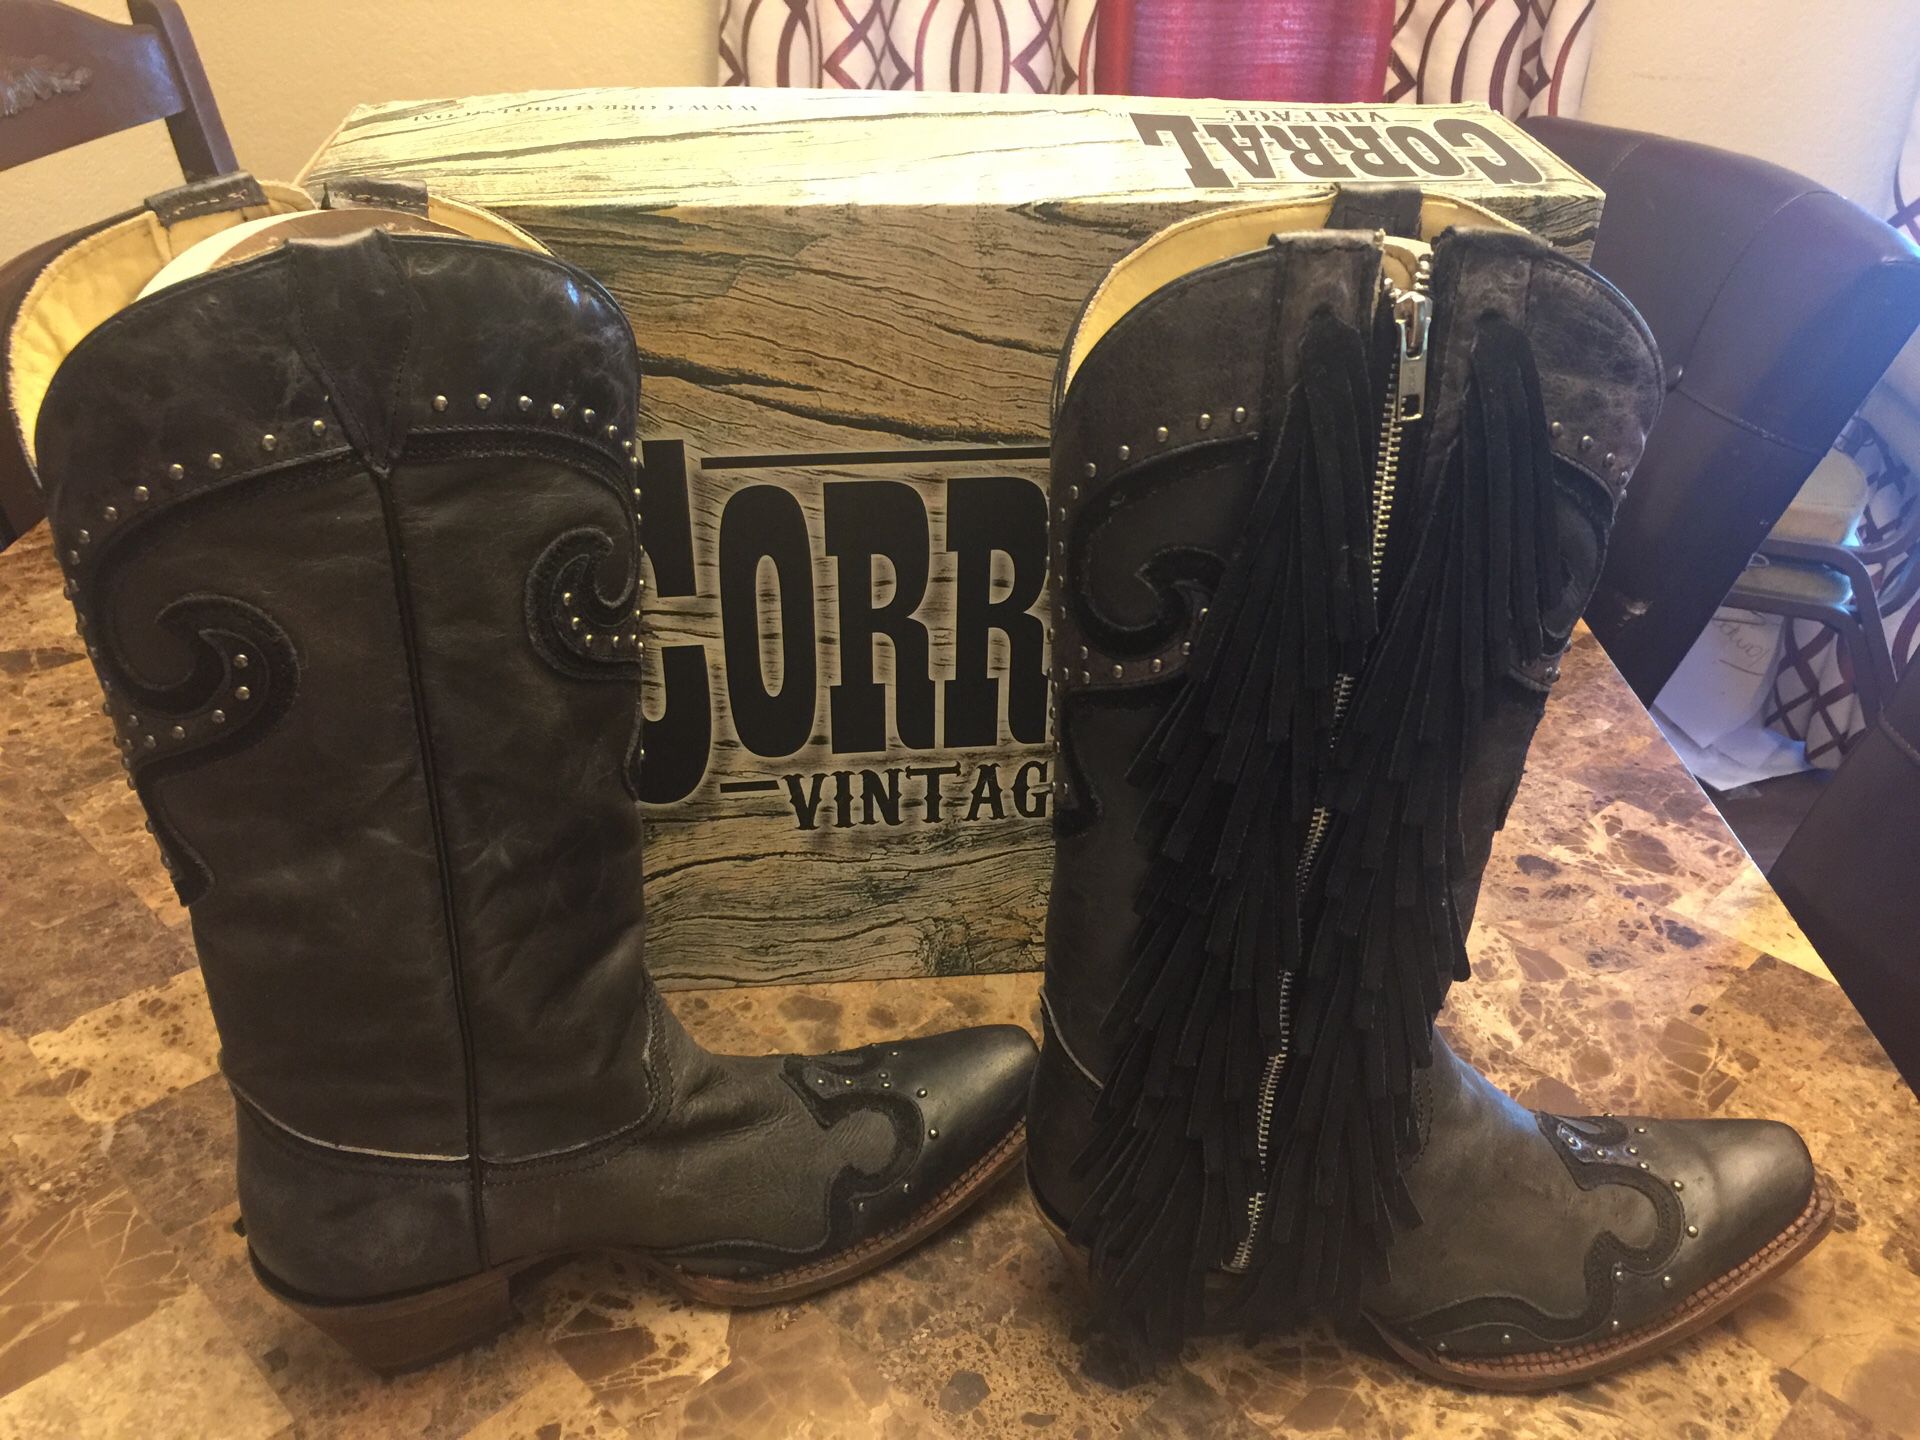 New Corral vintage fringe boots - woman’s size 9